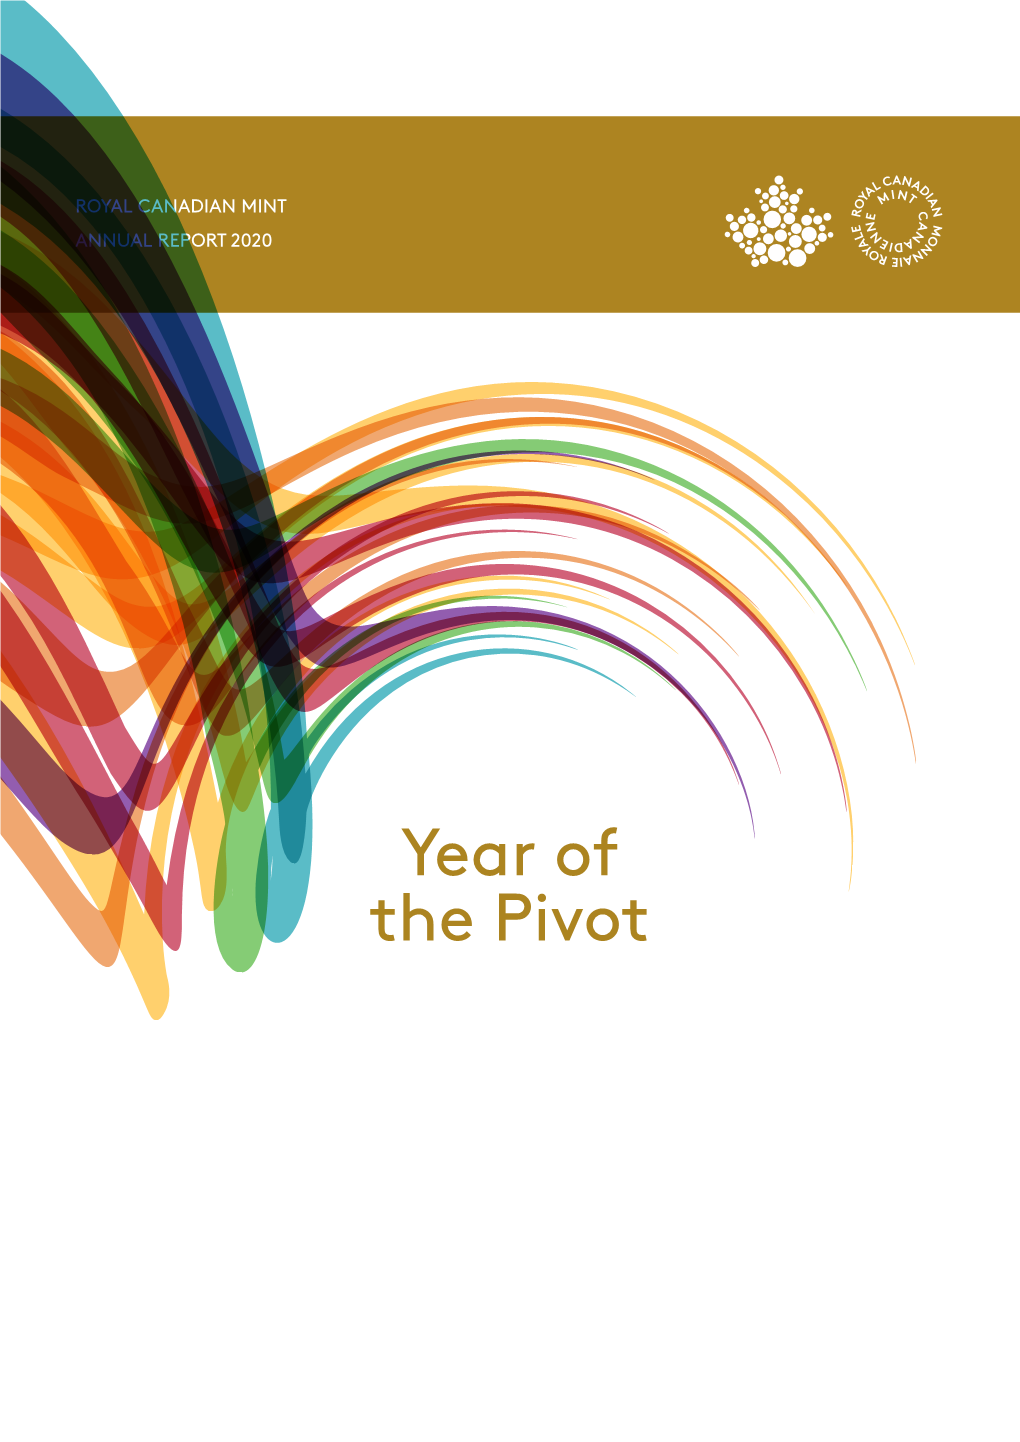 Royal Canadian Mint Annual Report 2020: Year of the Pivot